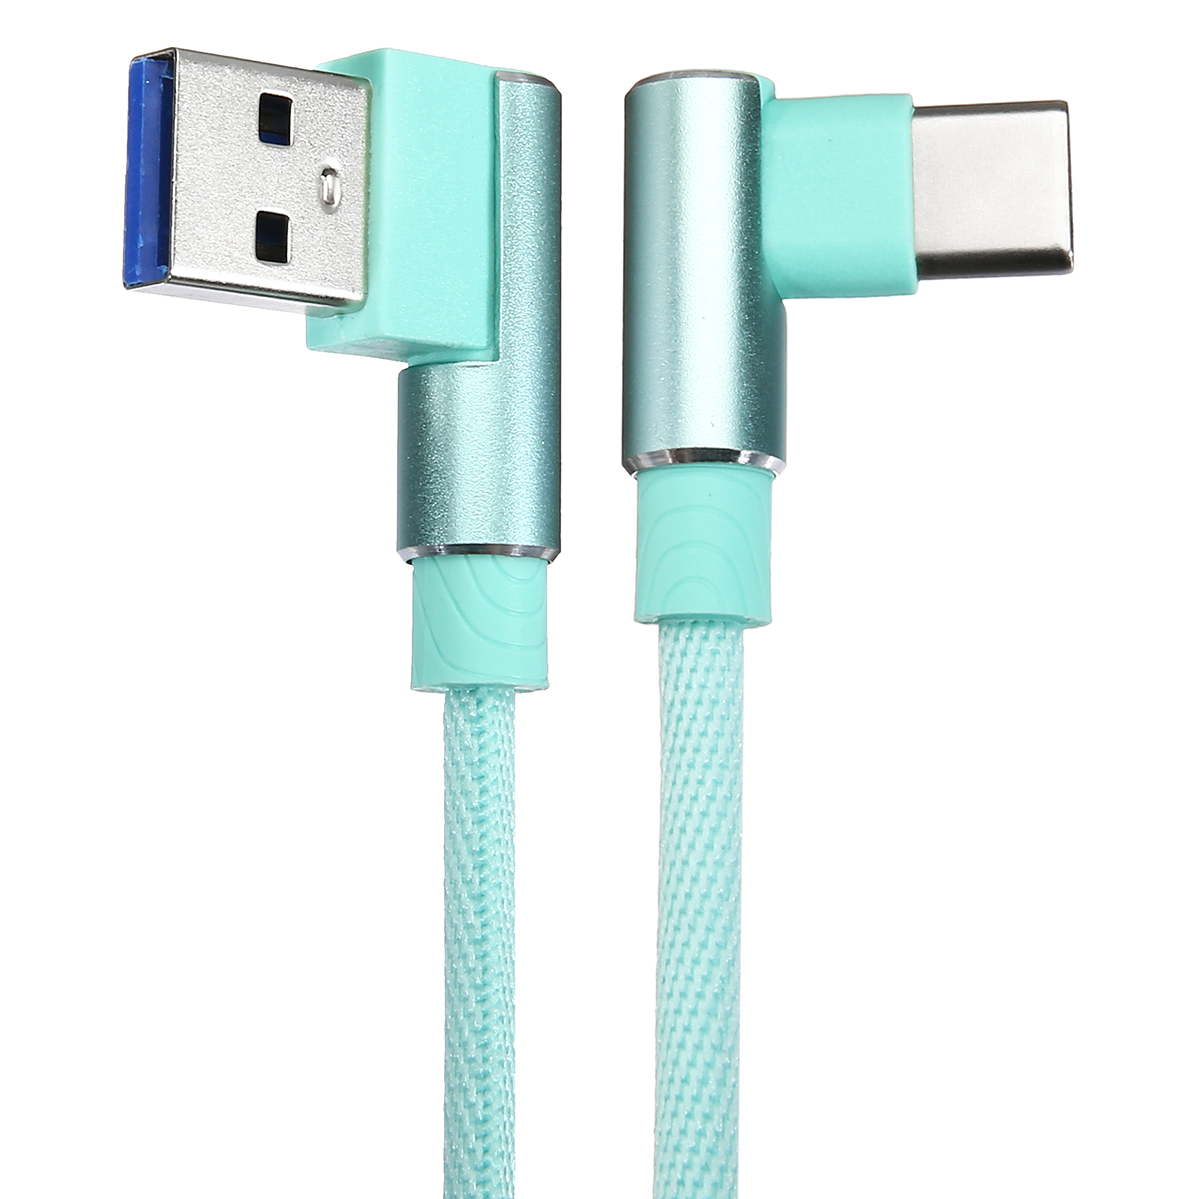 

Bakeey 90 Degree Angle 2A Type C Fast Charging Data Cable 3.28ft/1m for Xiaomi Mi Max 3 Pocophone F1